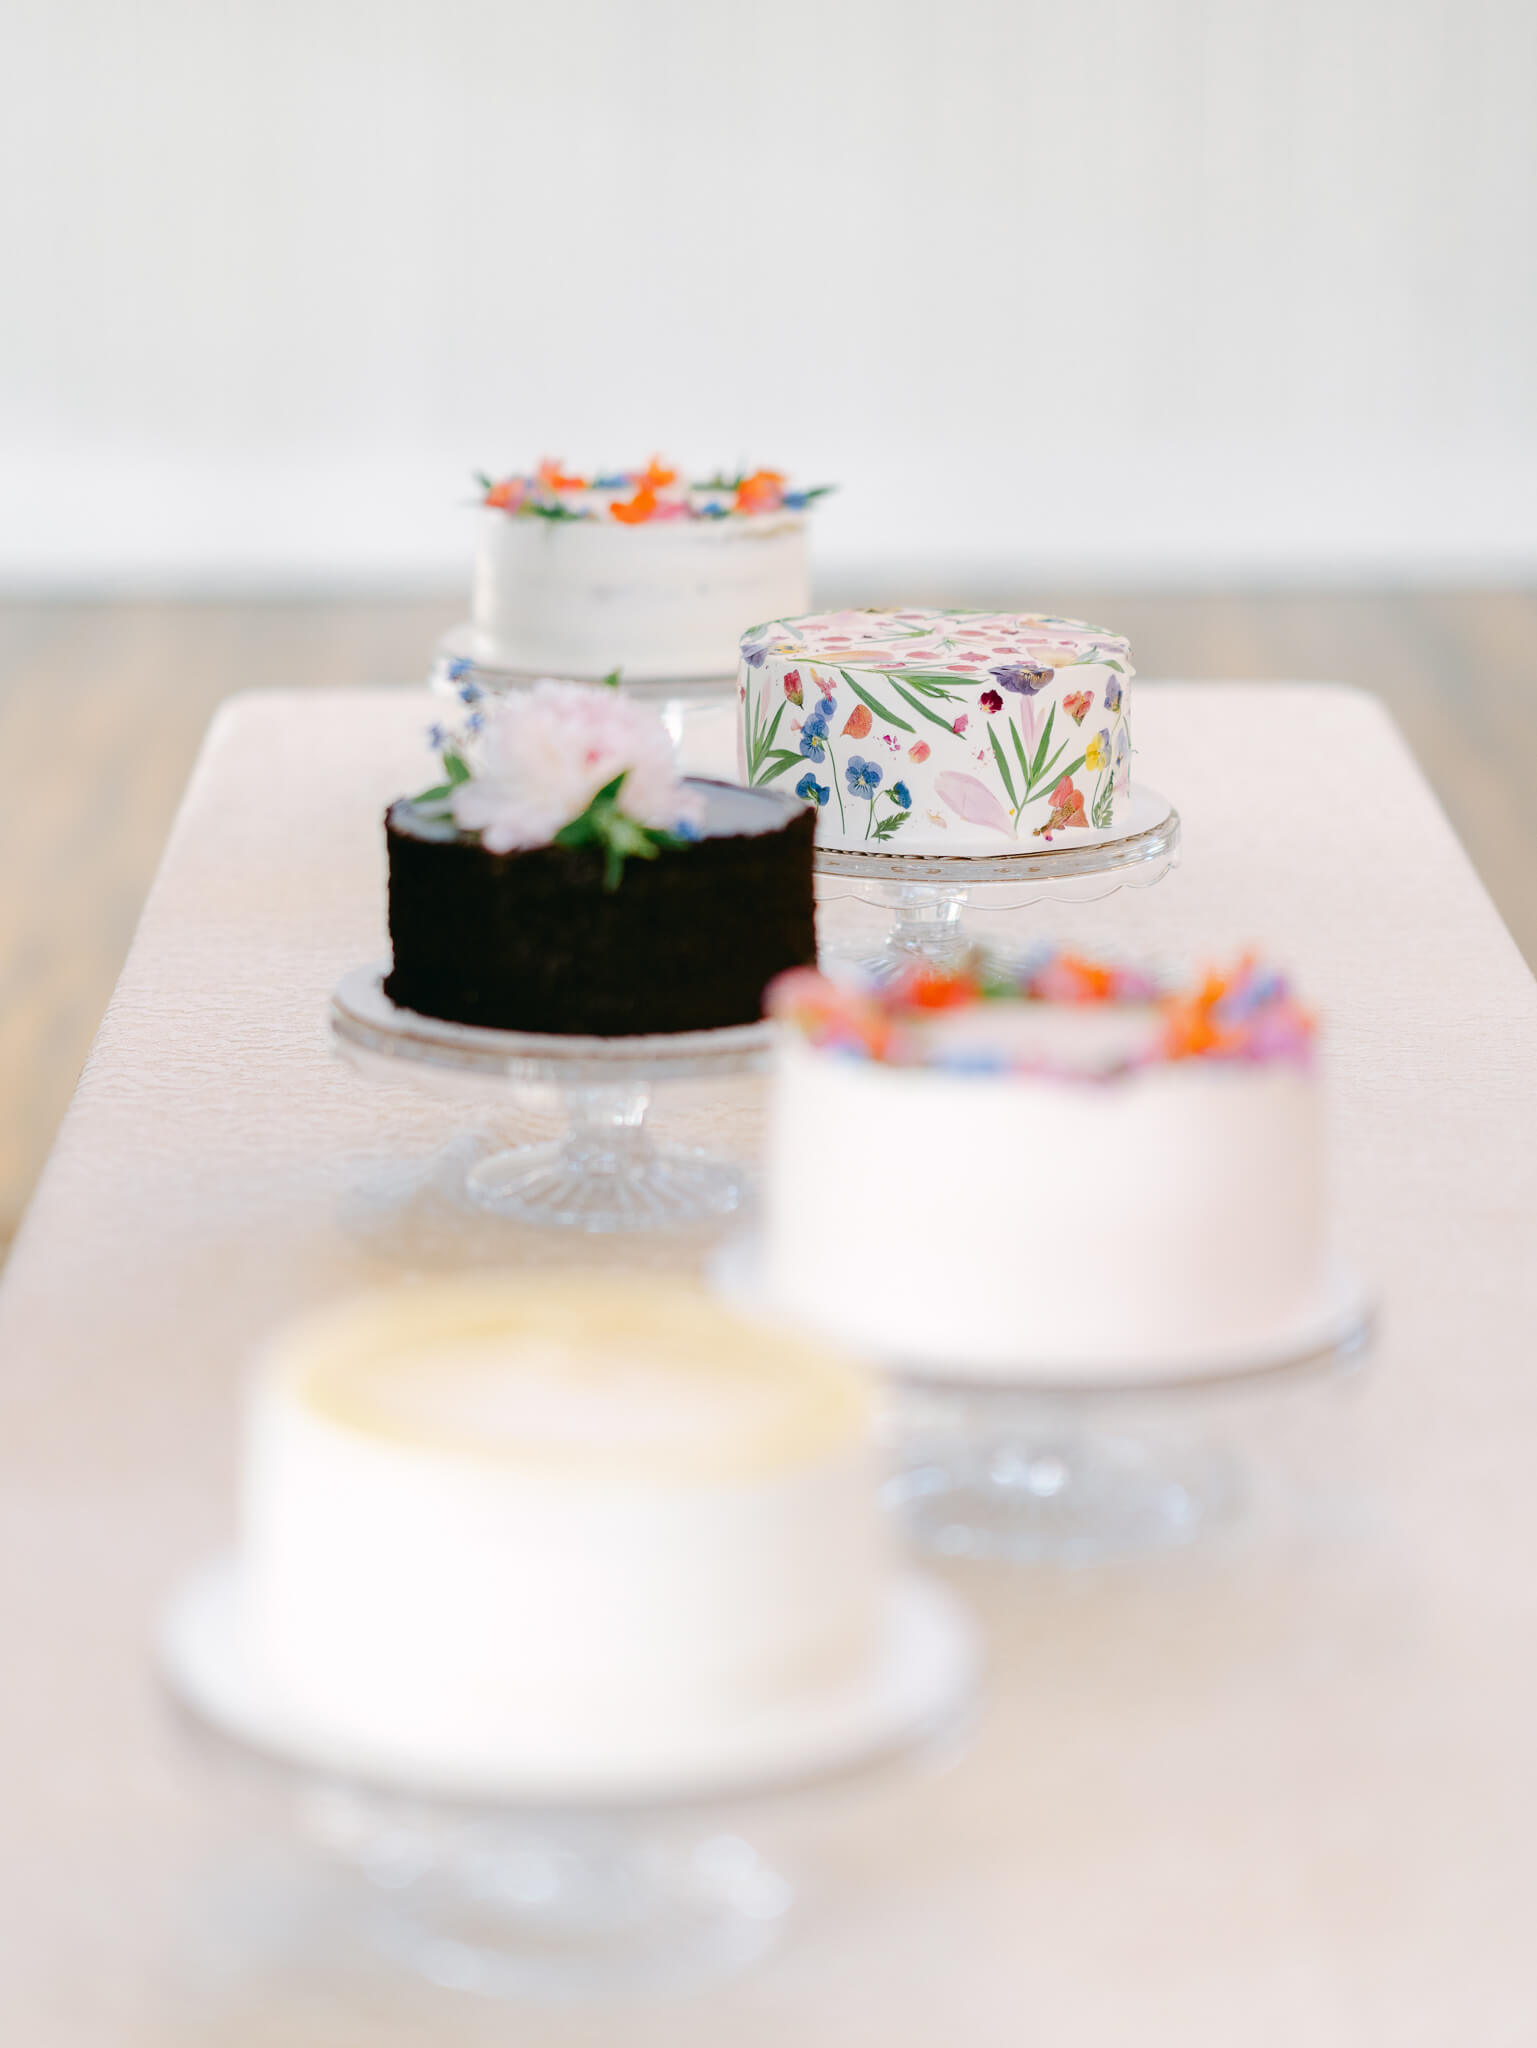 Five colorful round wedding cakes displayed on a blush tablecloth on a long table.